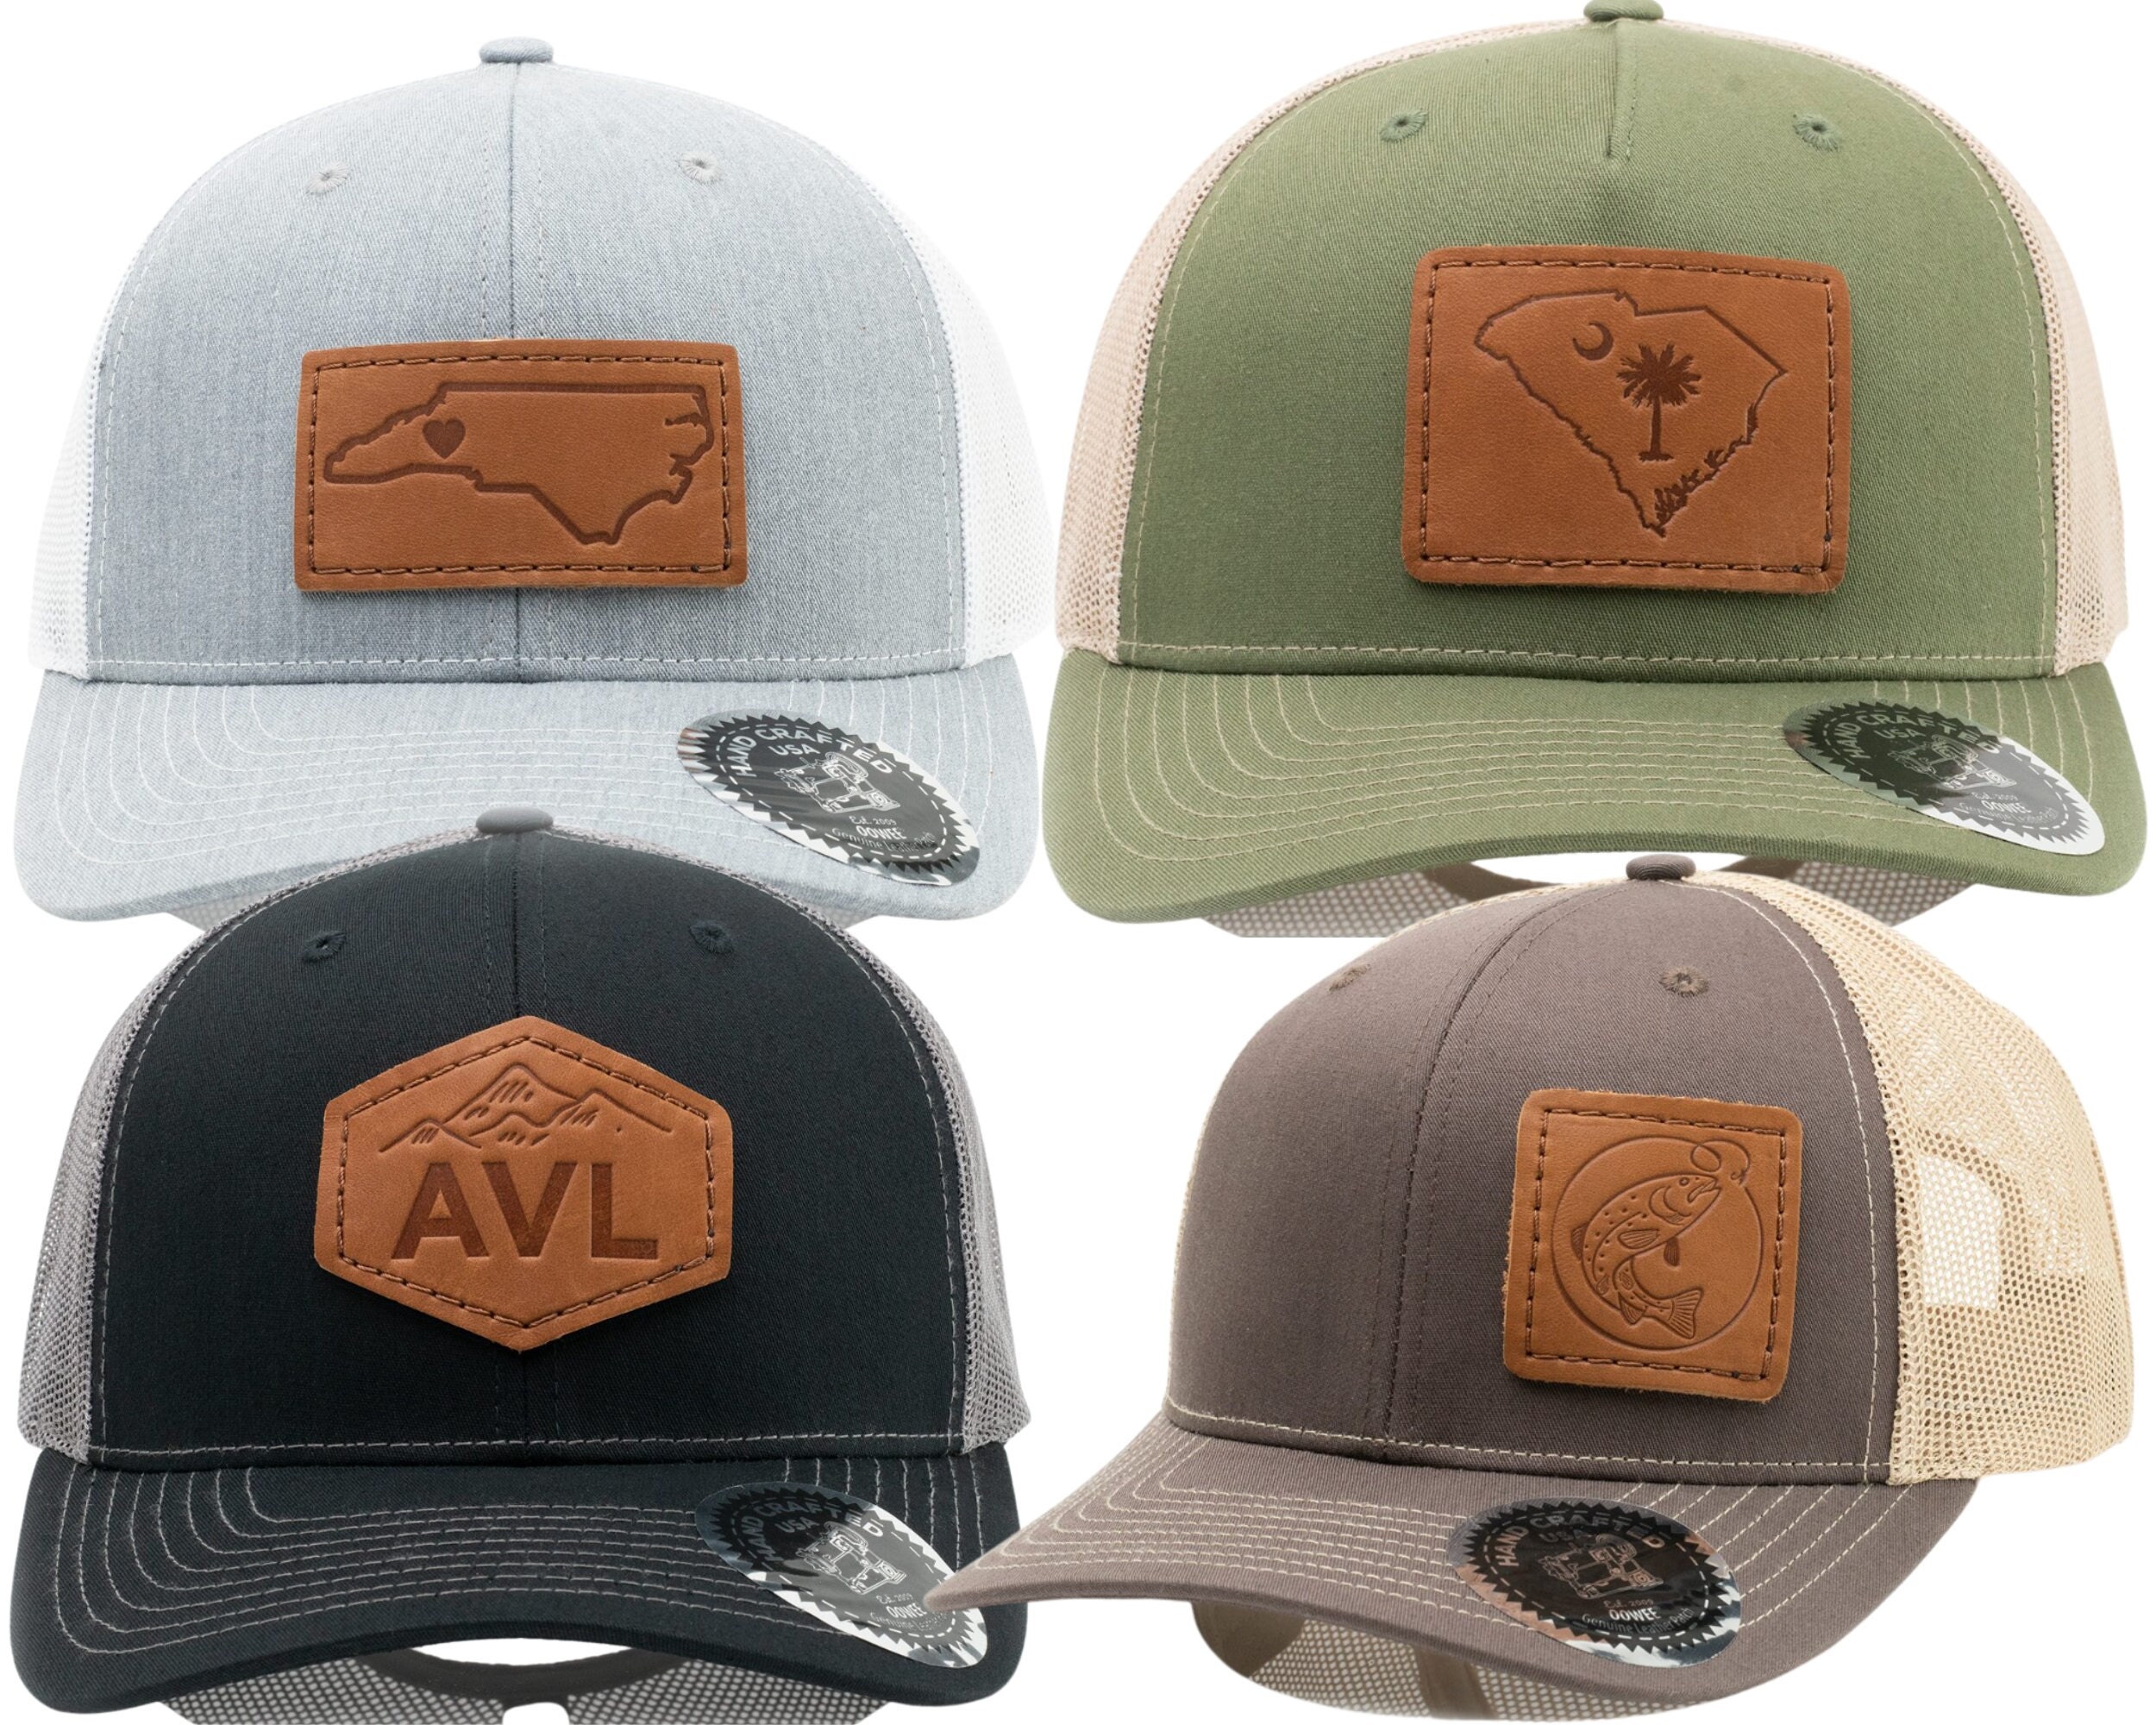 Women's Custom Engraved Logo Leather Patch Hats, Girls Business Logo Caps,  Personalized Sewn Leather Patches 